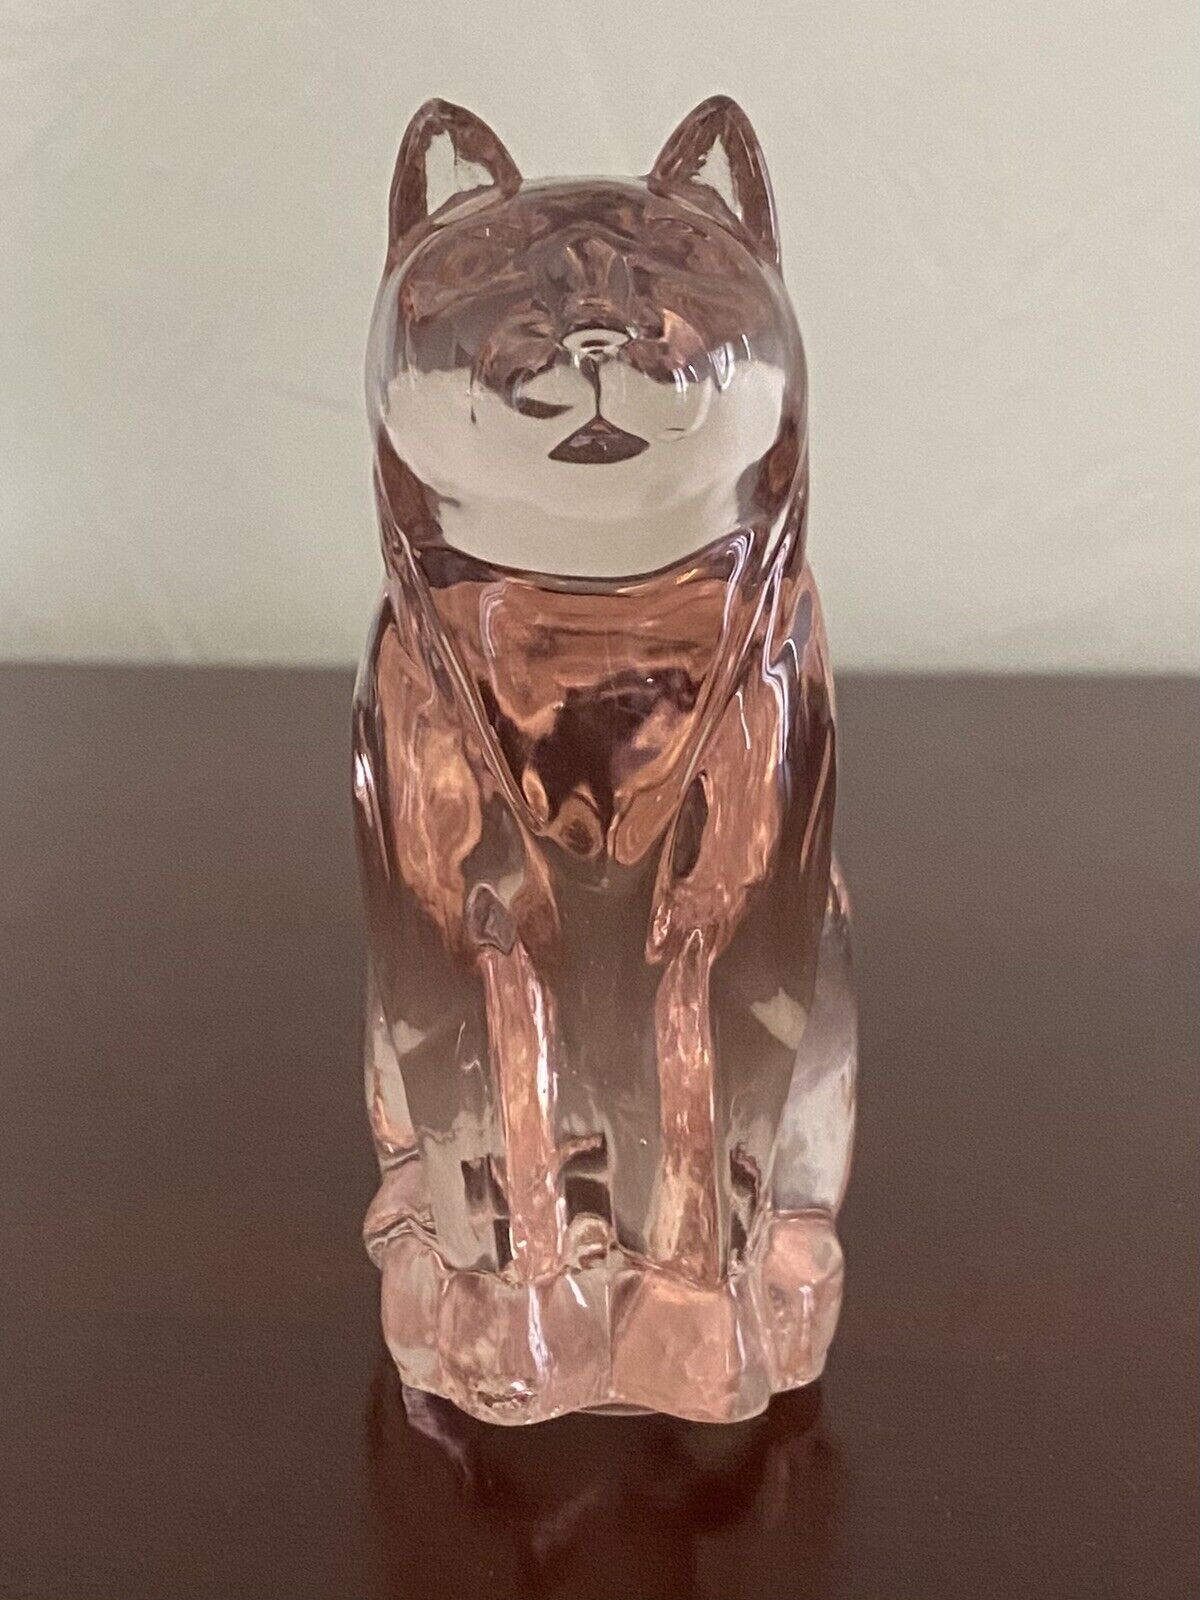 Vintage clear pink glass sitting cat figurine Fenton style 4” tall translucent